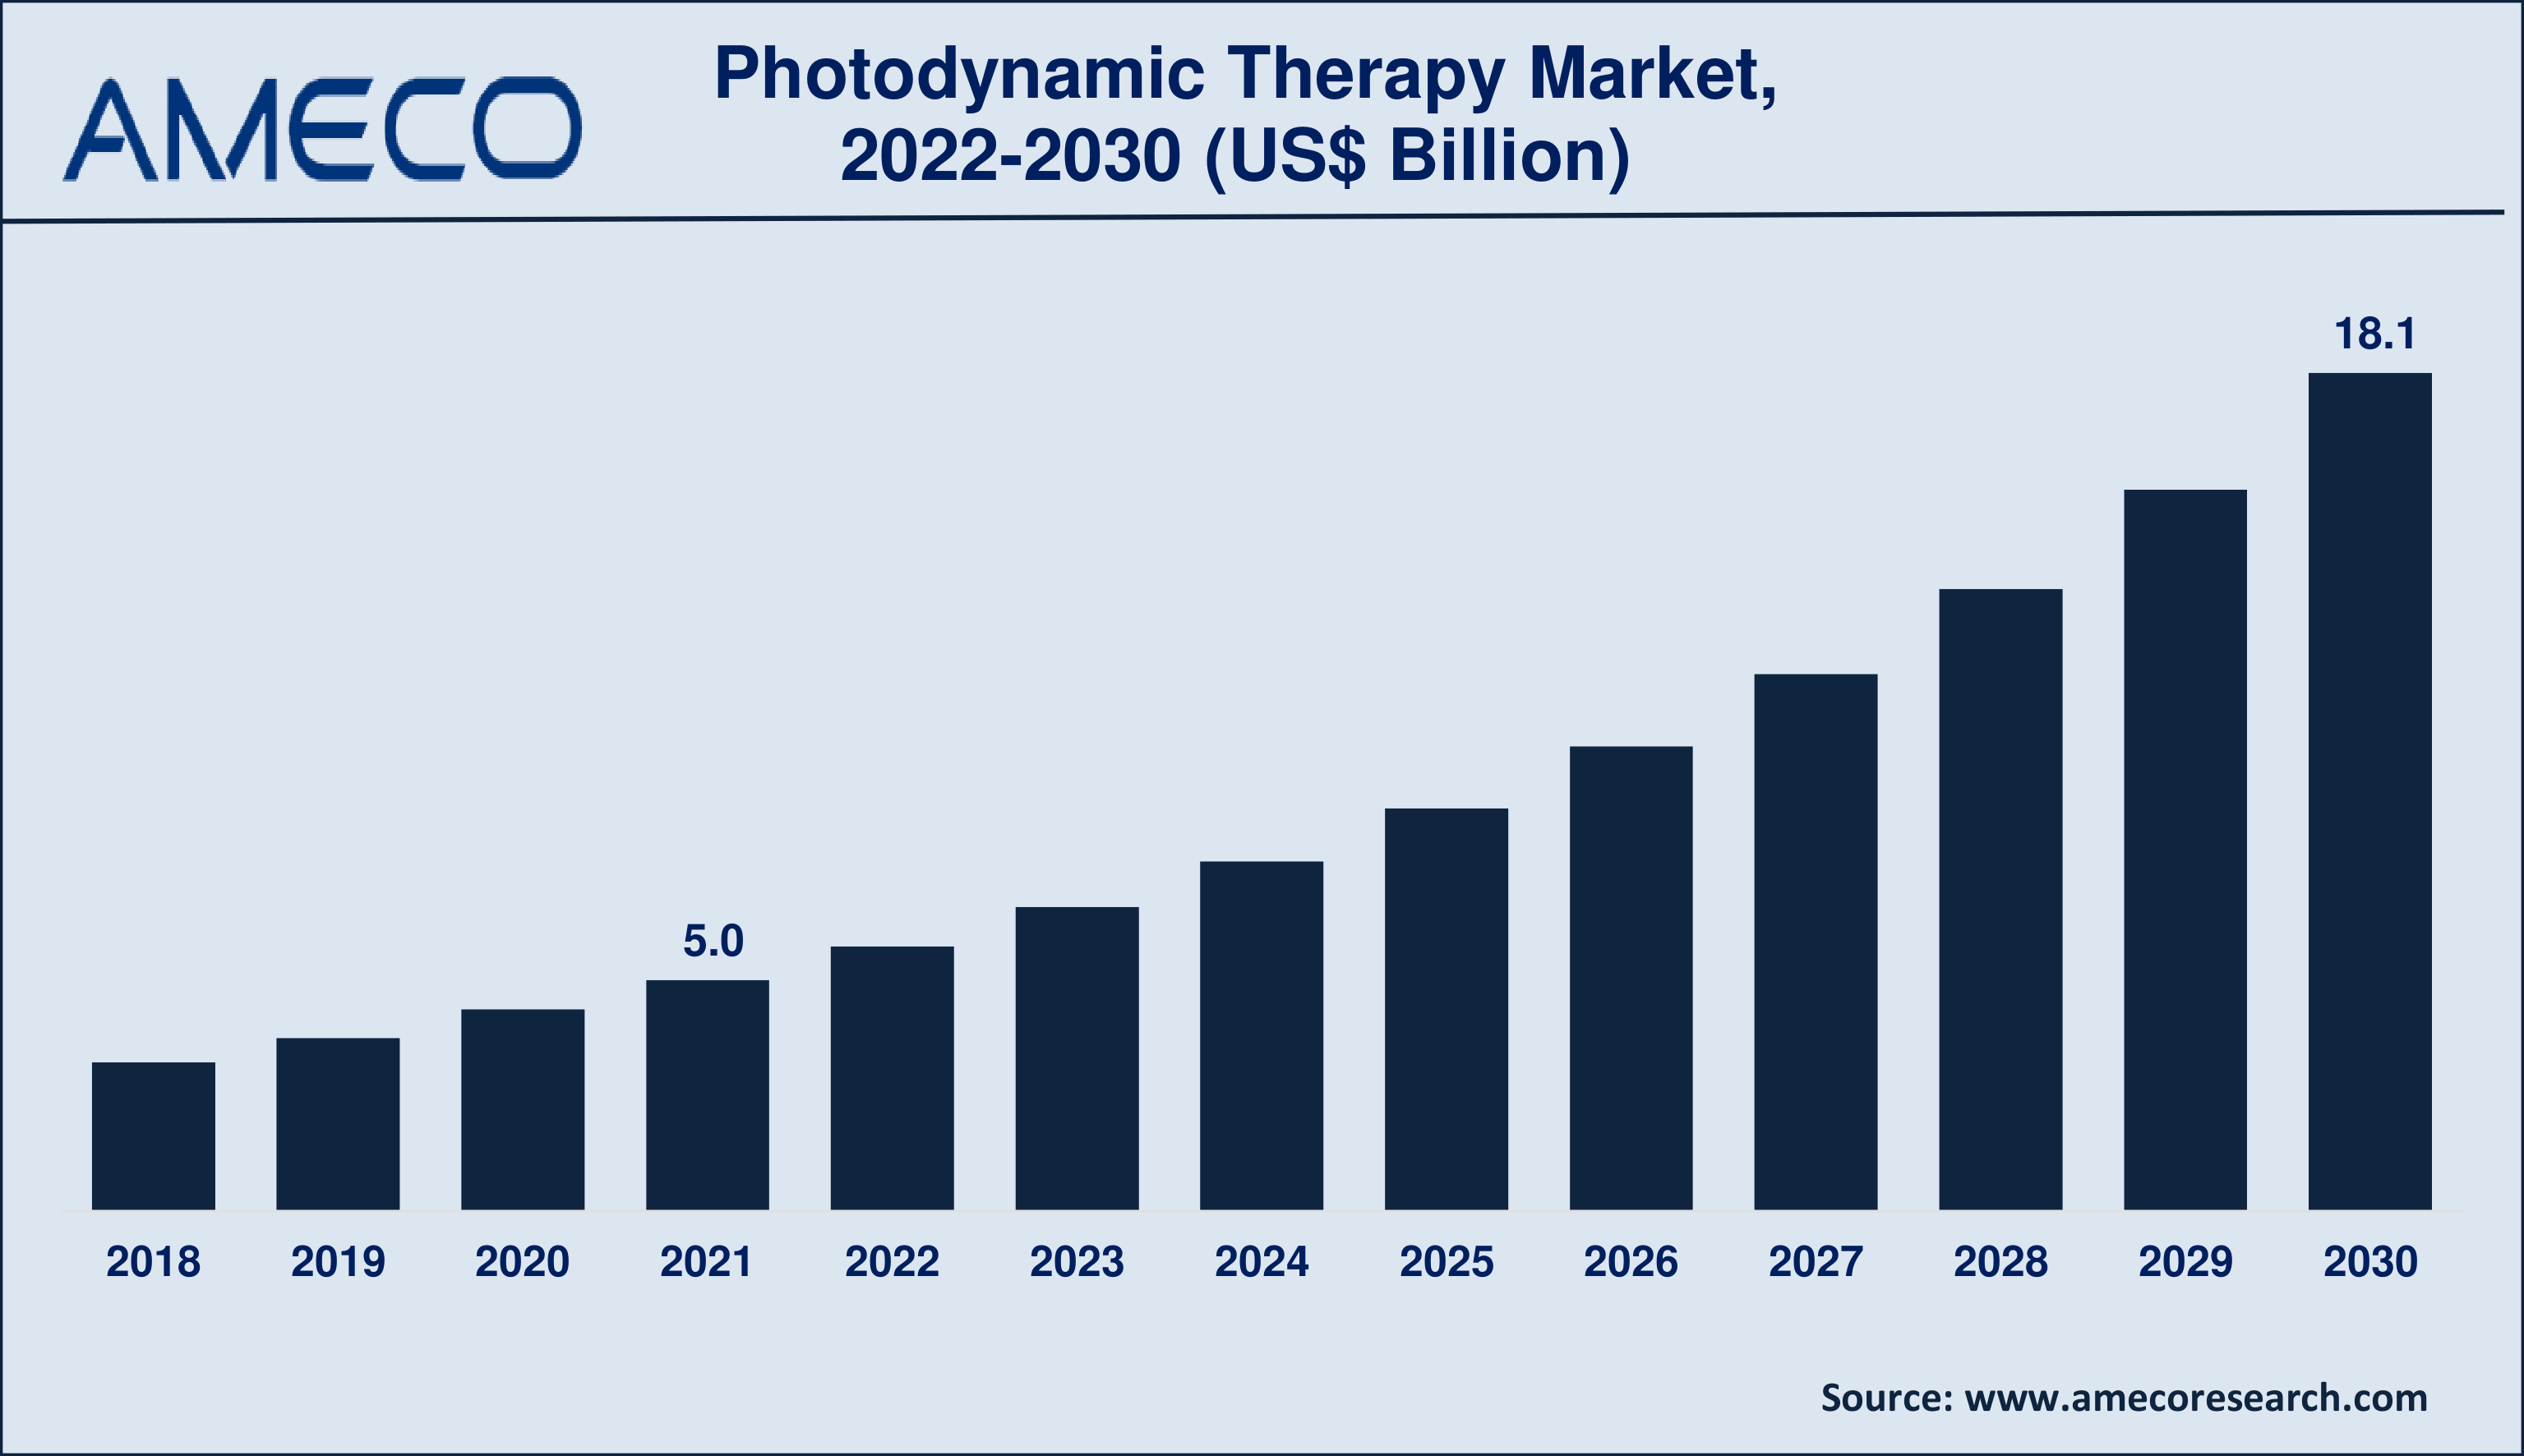 Photodynamic Therapy Market Size, Share, Growth, Trends, and Forecast 2022-2030